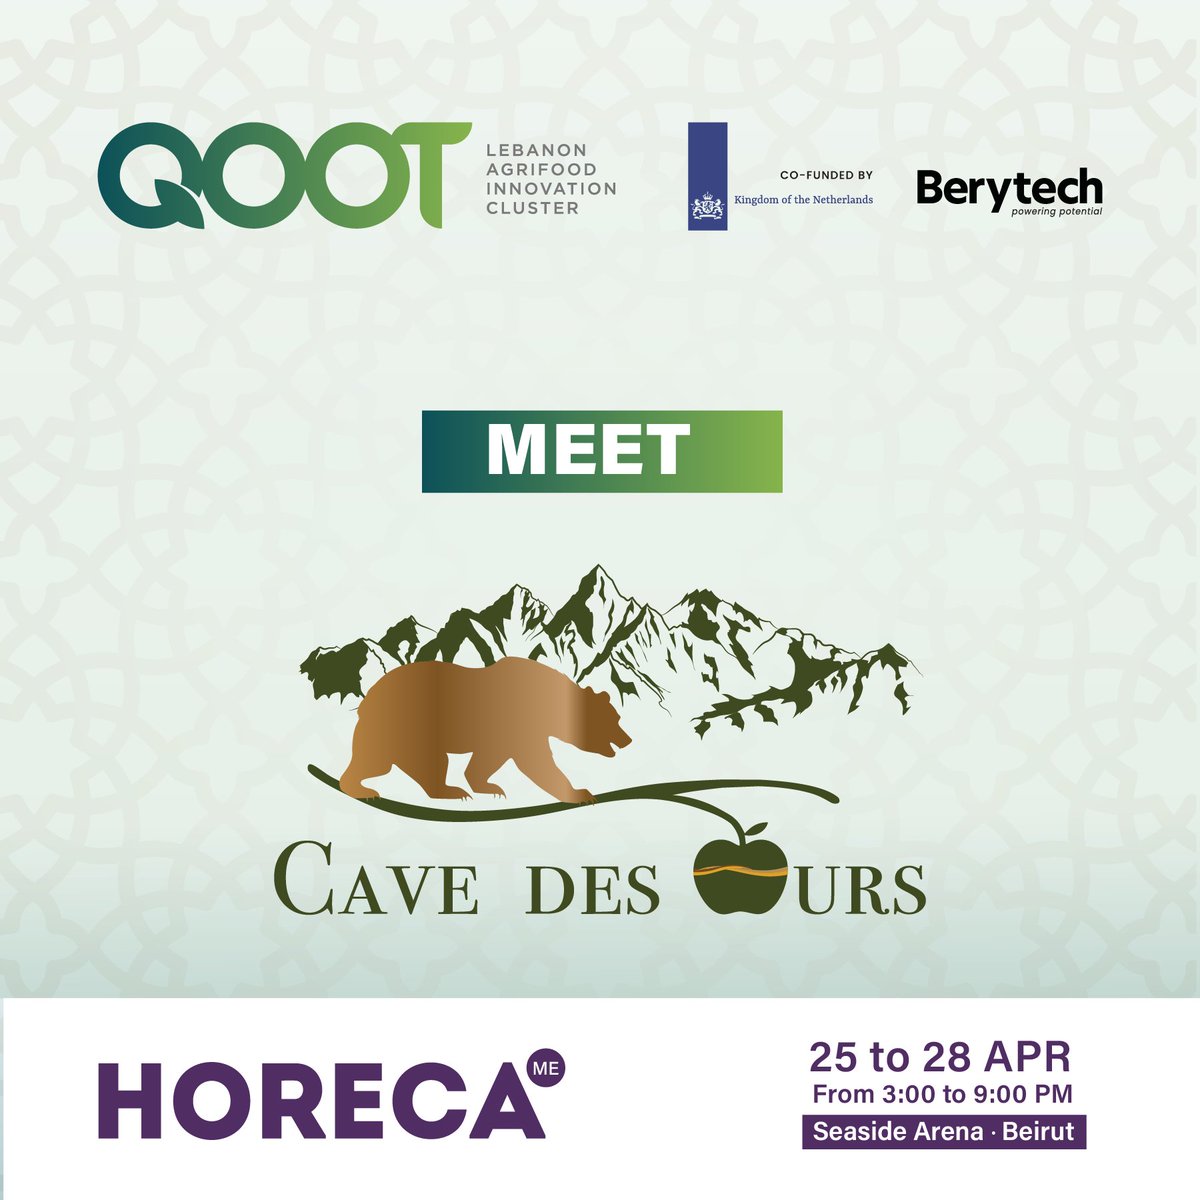 Discover the innovative products of Cave Des Ours, member of the QOOT cluster showcasing at the HORECA exhibition. 
Check out QOOT’s booth on April 25 – 28 from 3 to 9 pm at the Seaside Arena, Beirut.

qoot.org/qoot-cluster-s…

@HorecaConnects #HORECALebanon #QOOTinHORECA